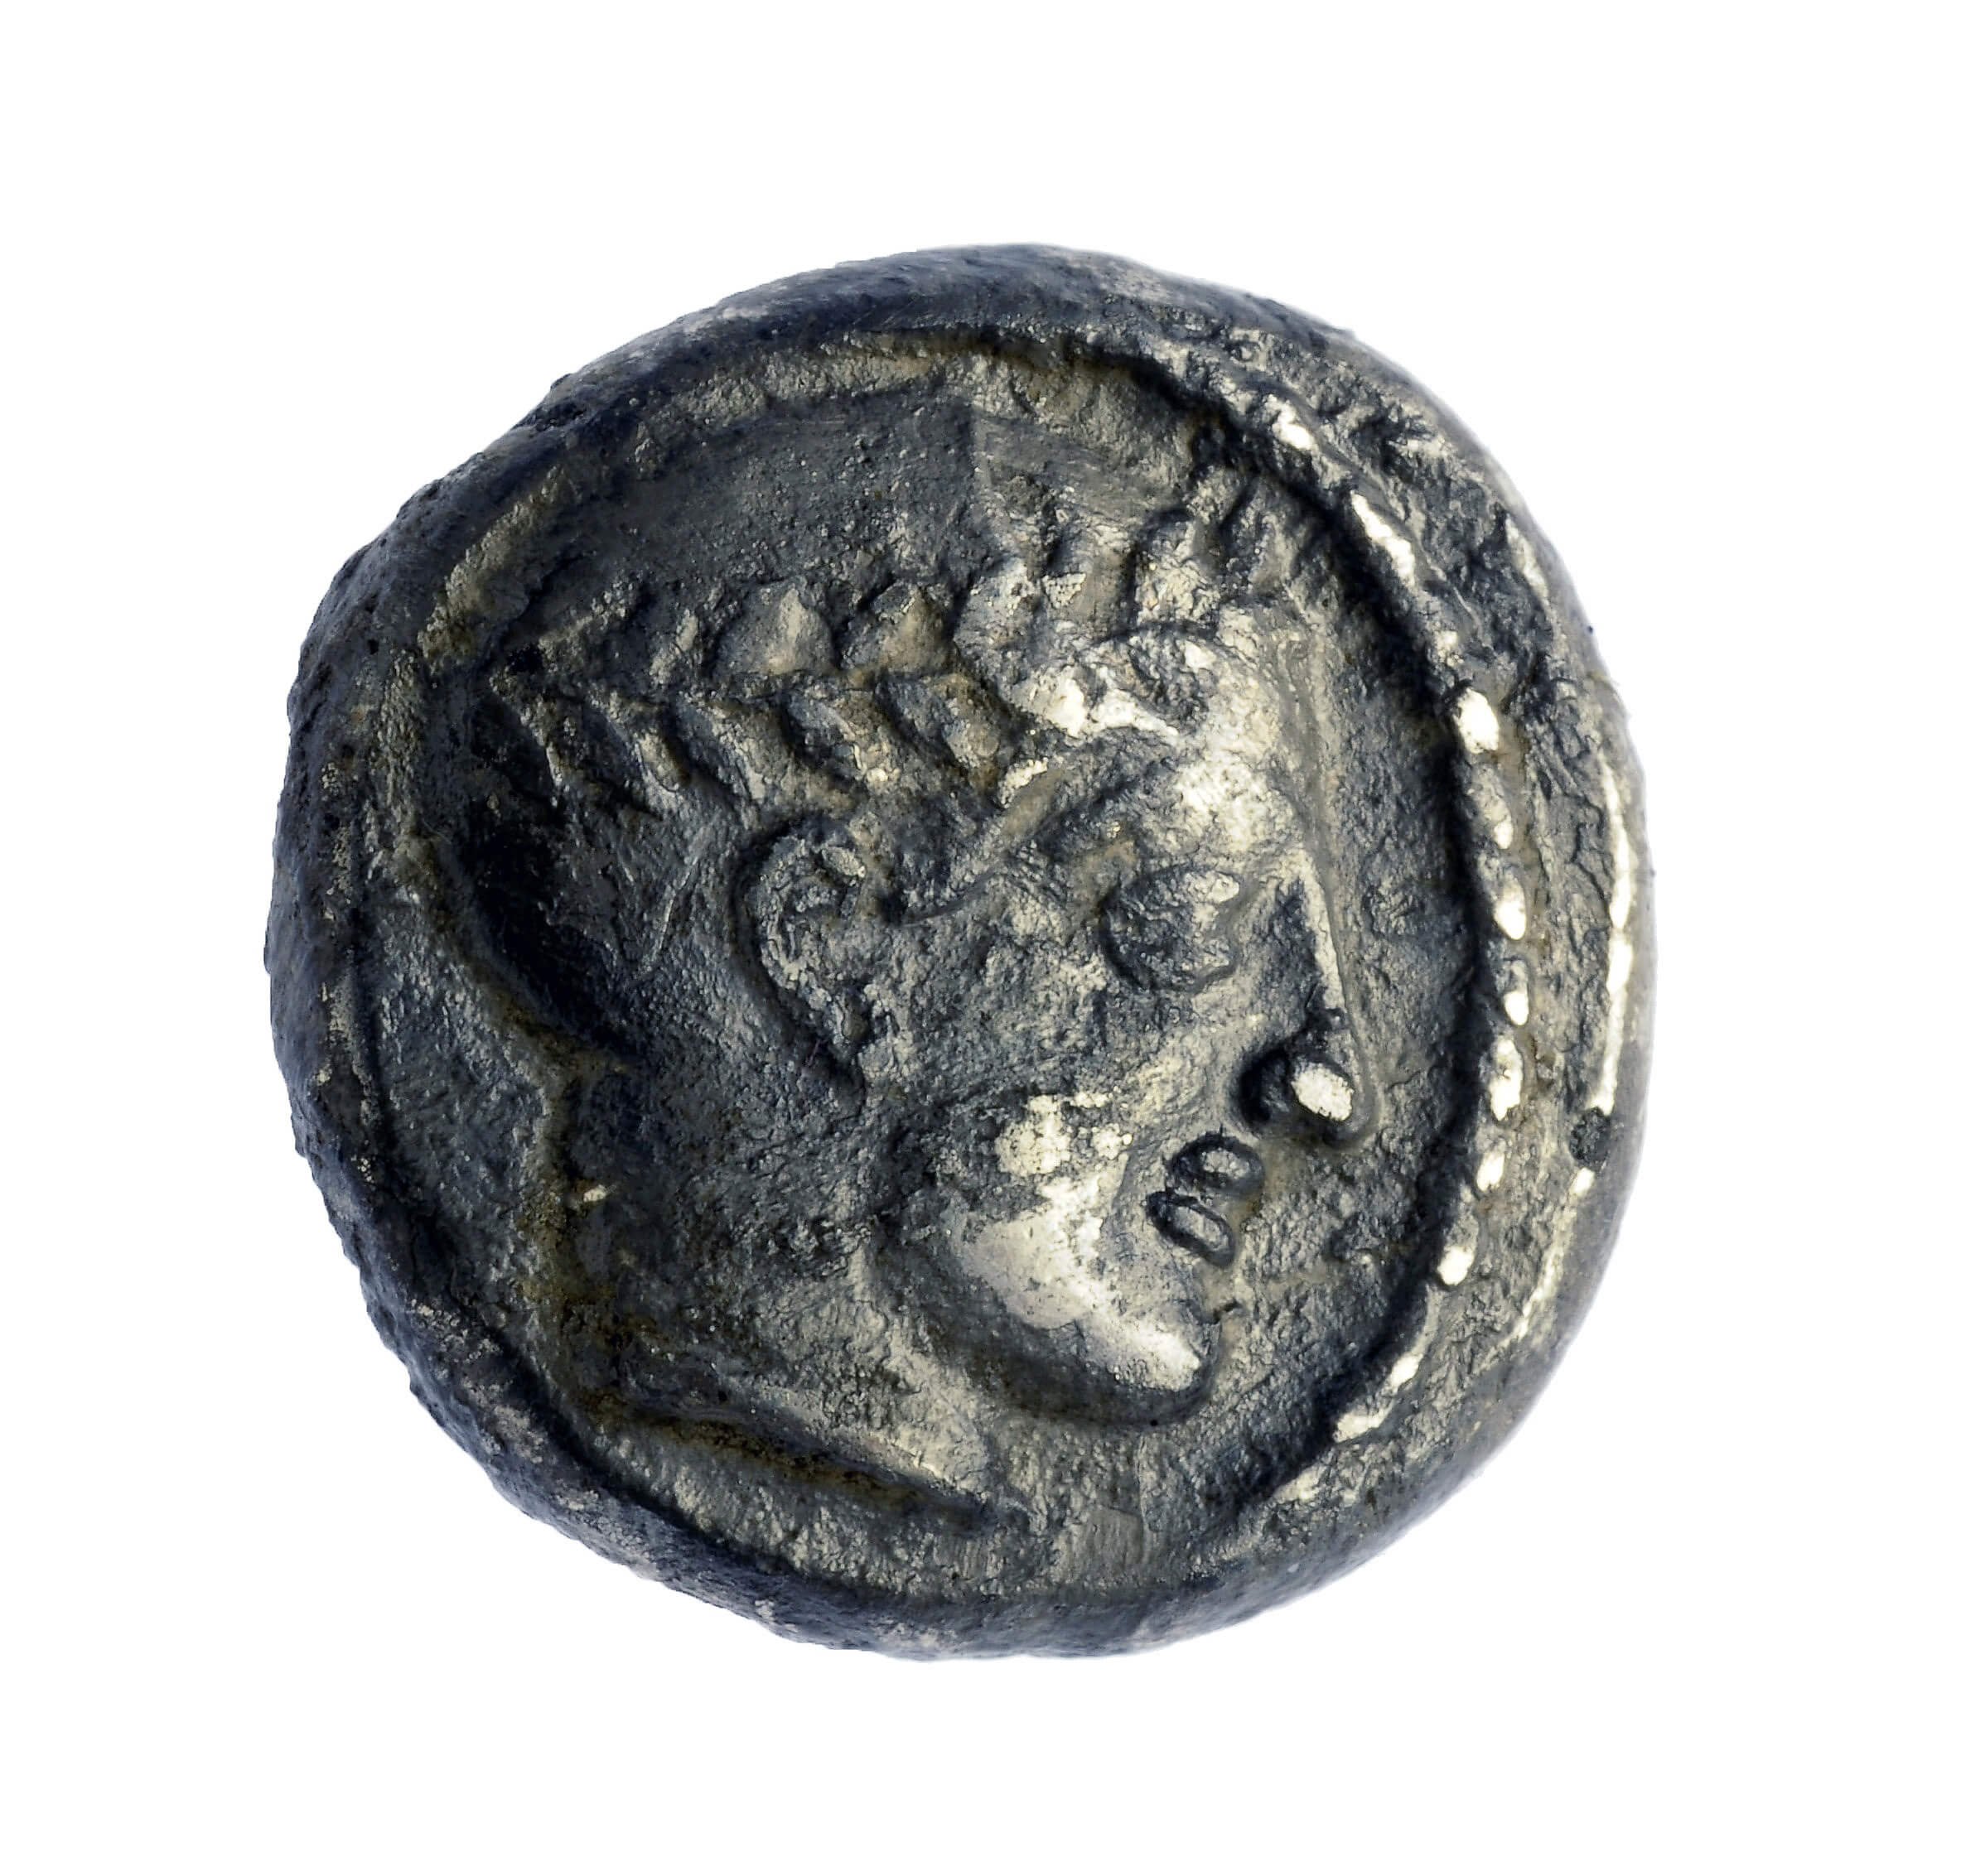 A coin from the reign of King Antiochus III. Photo: Clara Amit, courtesy of the Antiquities